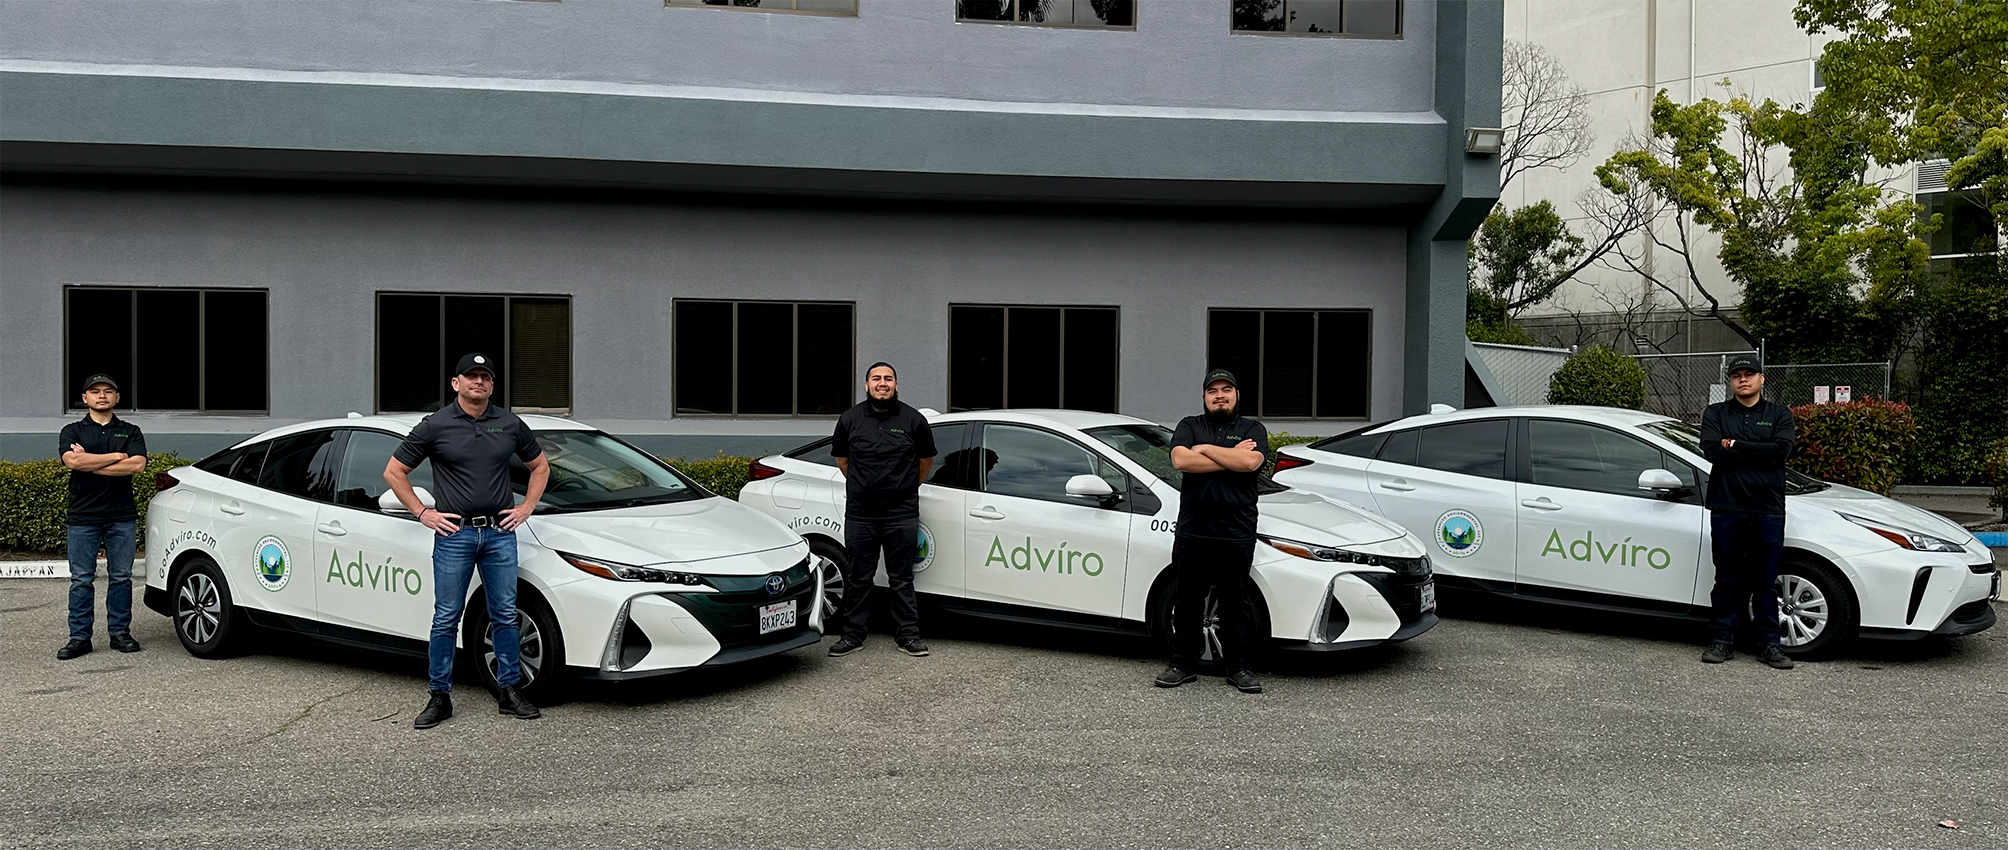 Adviro company cars are used to service commercial, public works and residential properties across the SF Bay Area and Northern California.